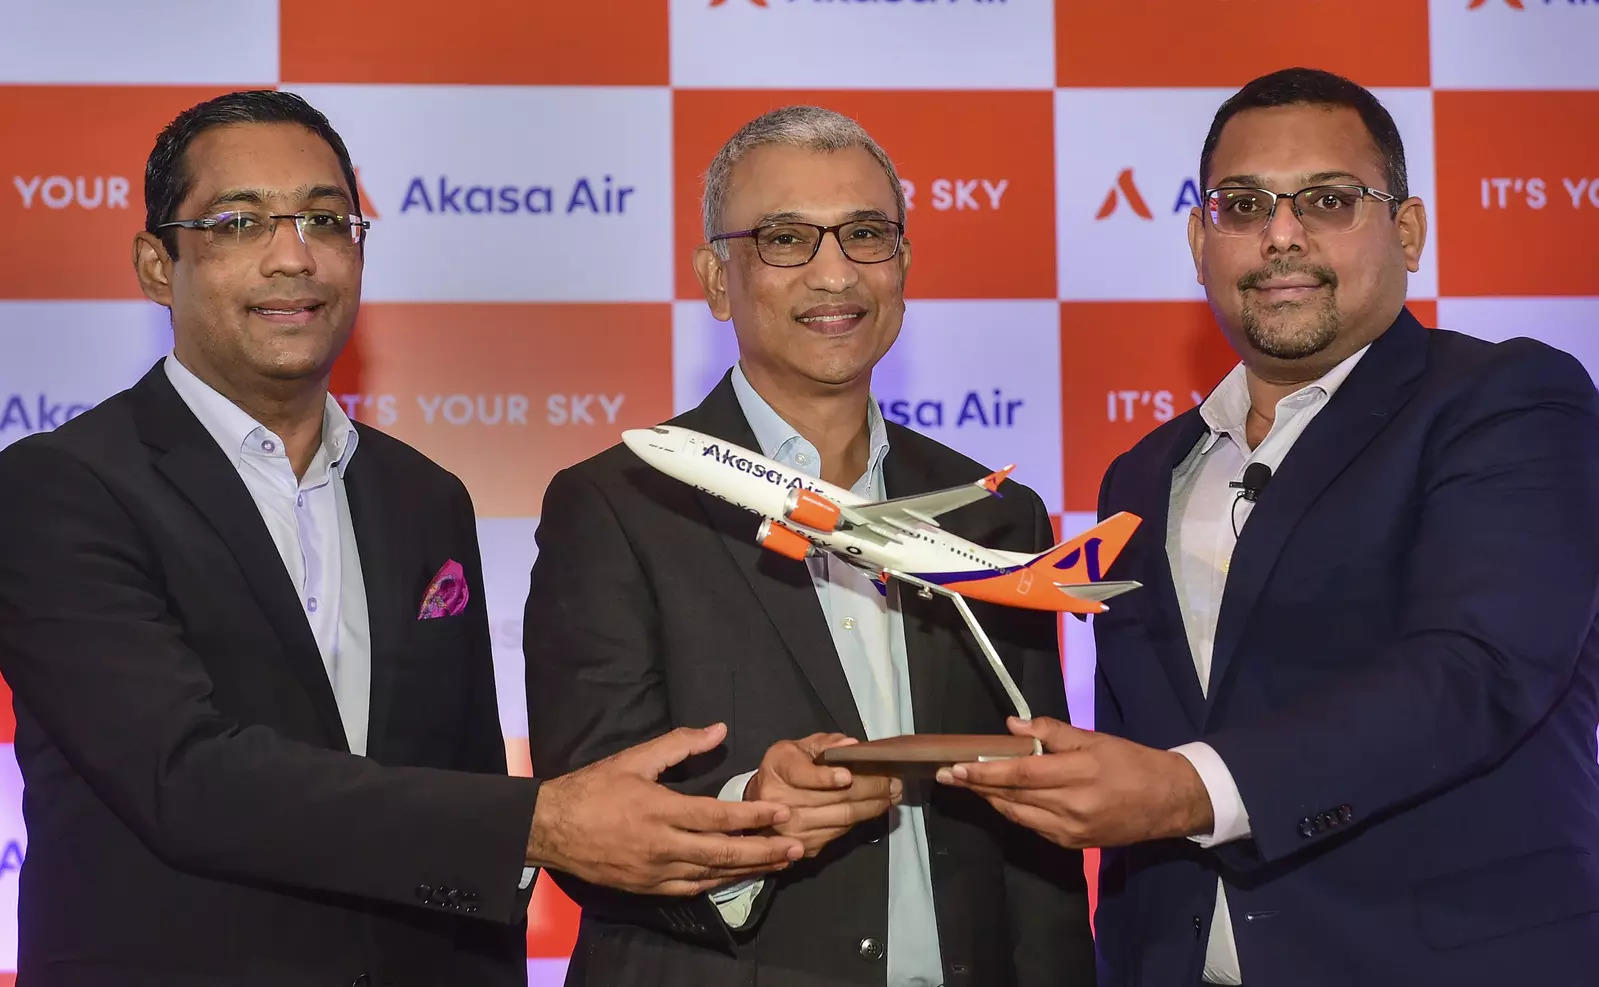  New Delhi: Akasa Air CEO Vinay Dube (centre) flanked by Akasa Air co-founders Belson Coutinho (right) and Praveen Iyer (left) during a press conference in New Delhi.